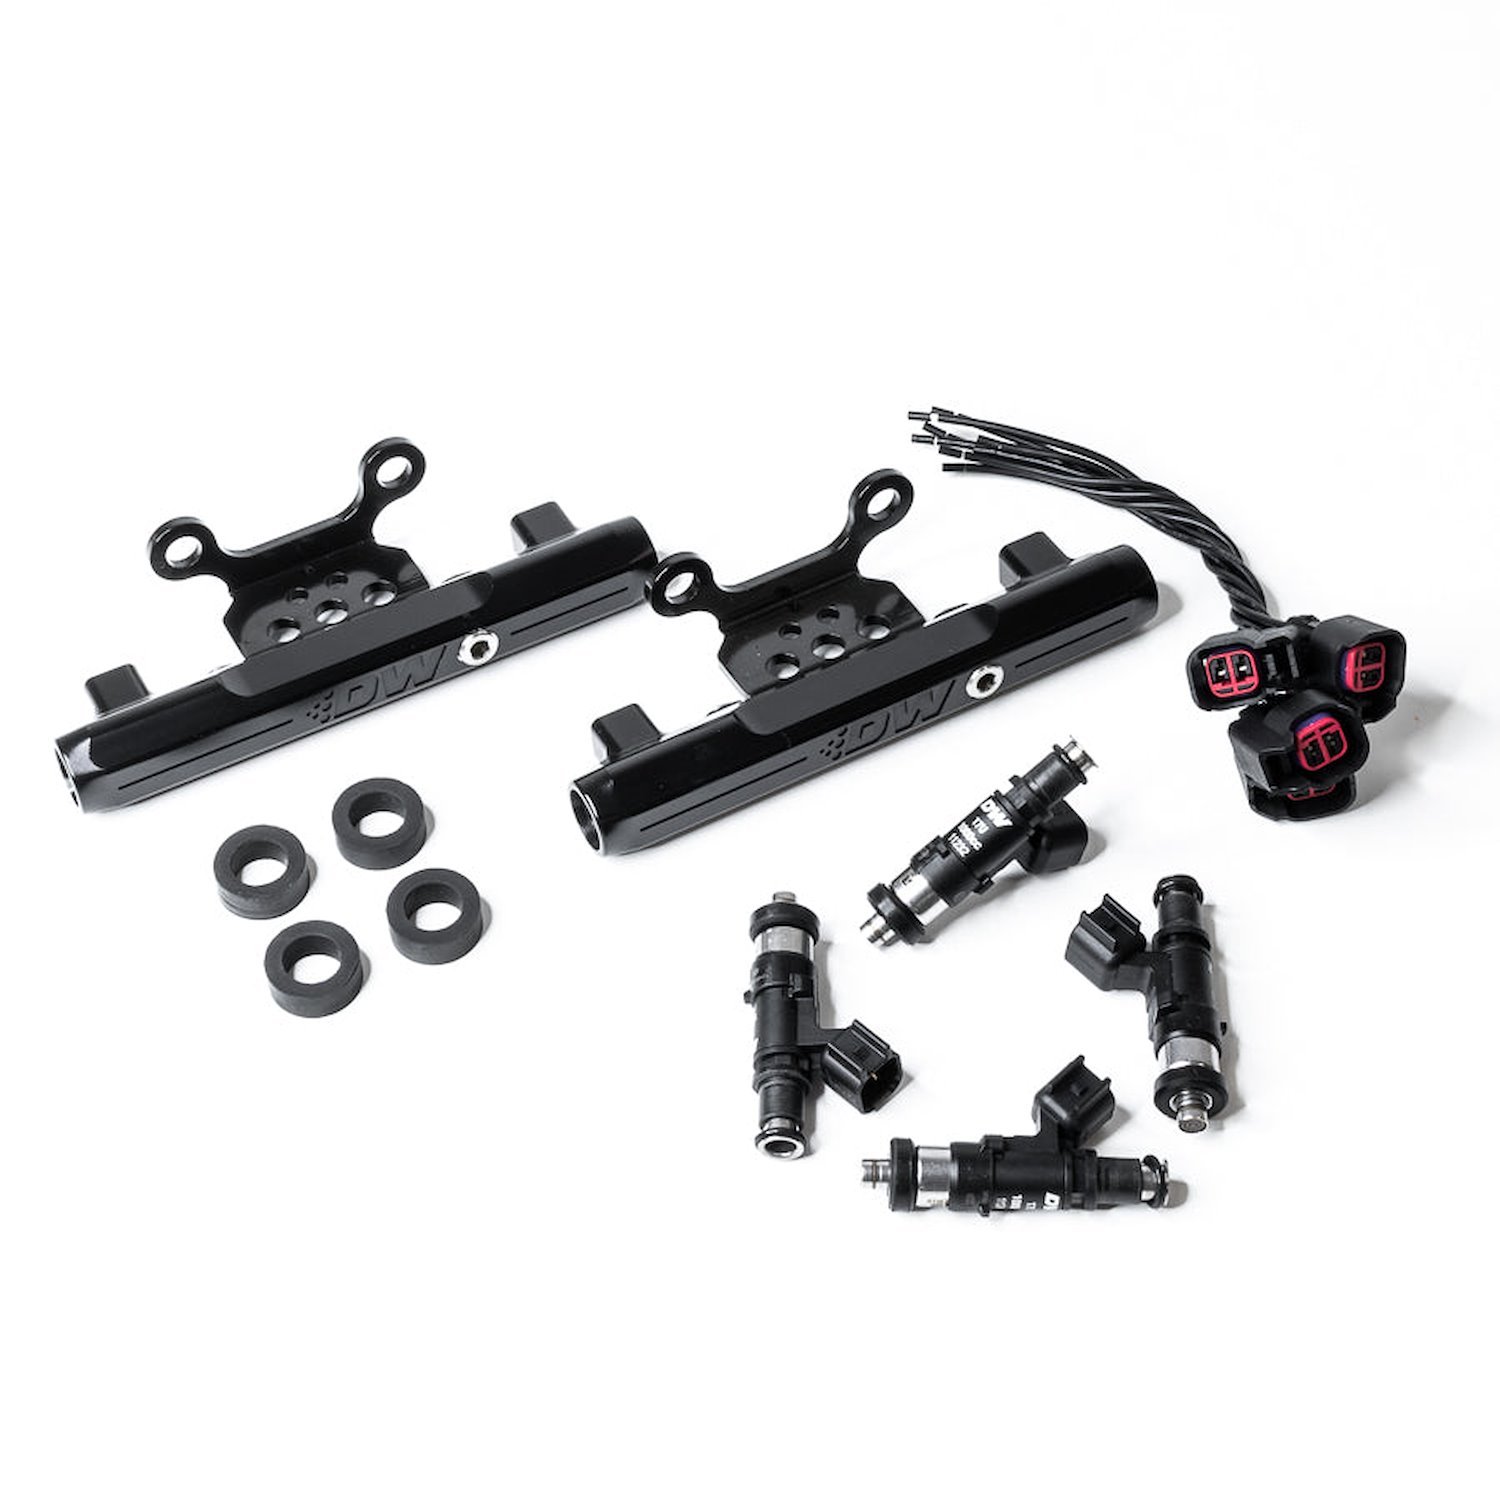 61011000 Subaru side feed to top feed fuel rail conversion kit and 1000cc fuel Injectors for 04-06 STI and Legacy GT